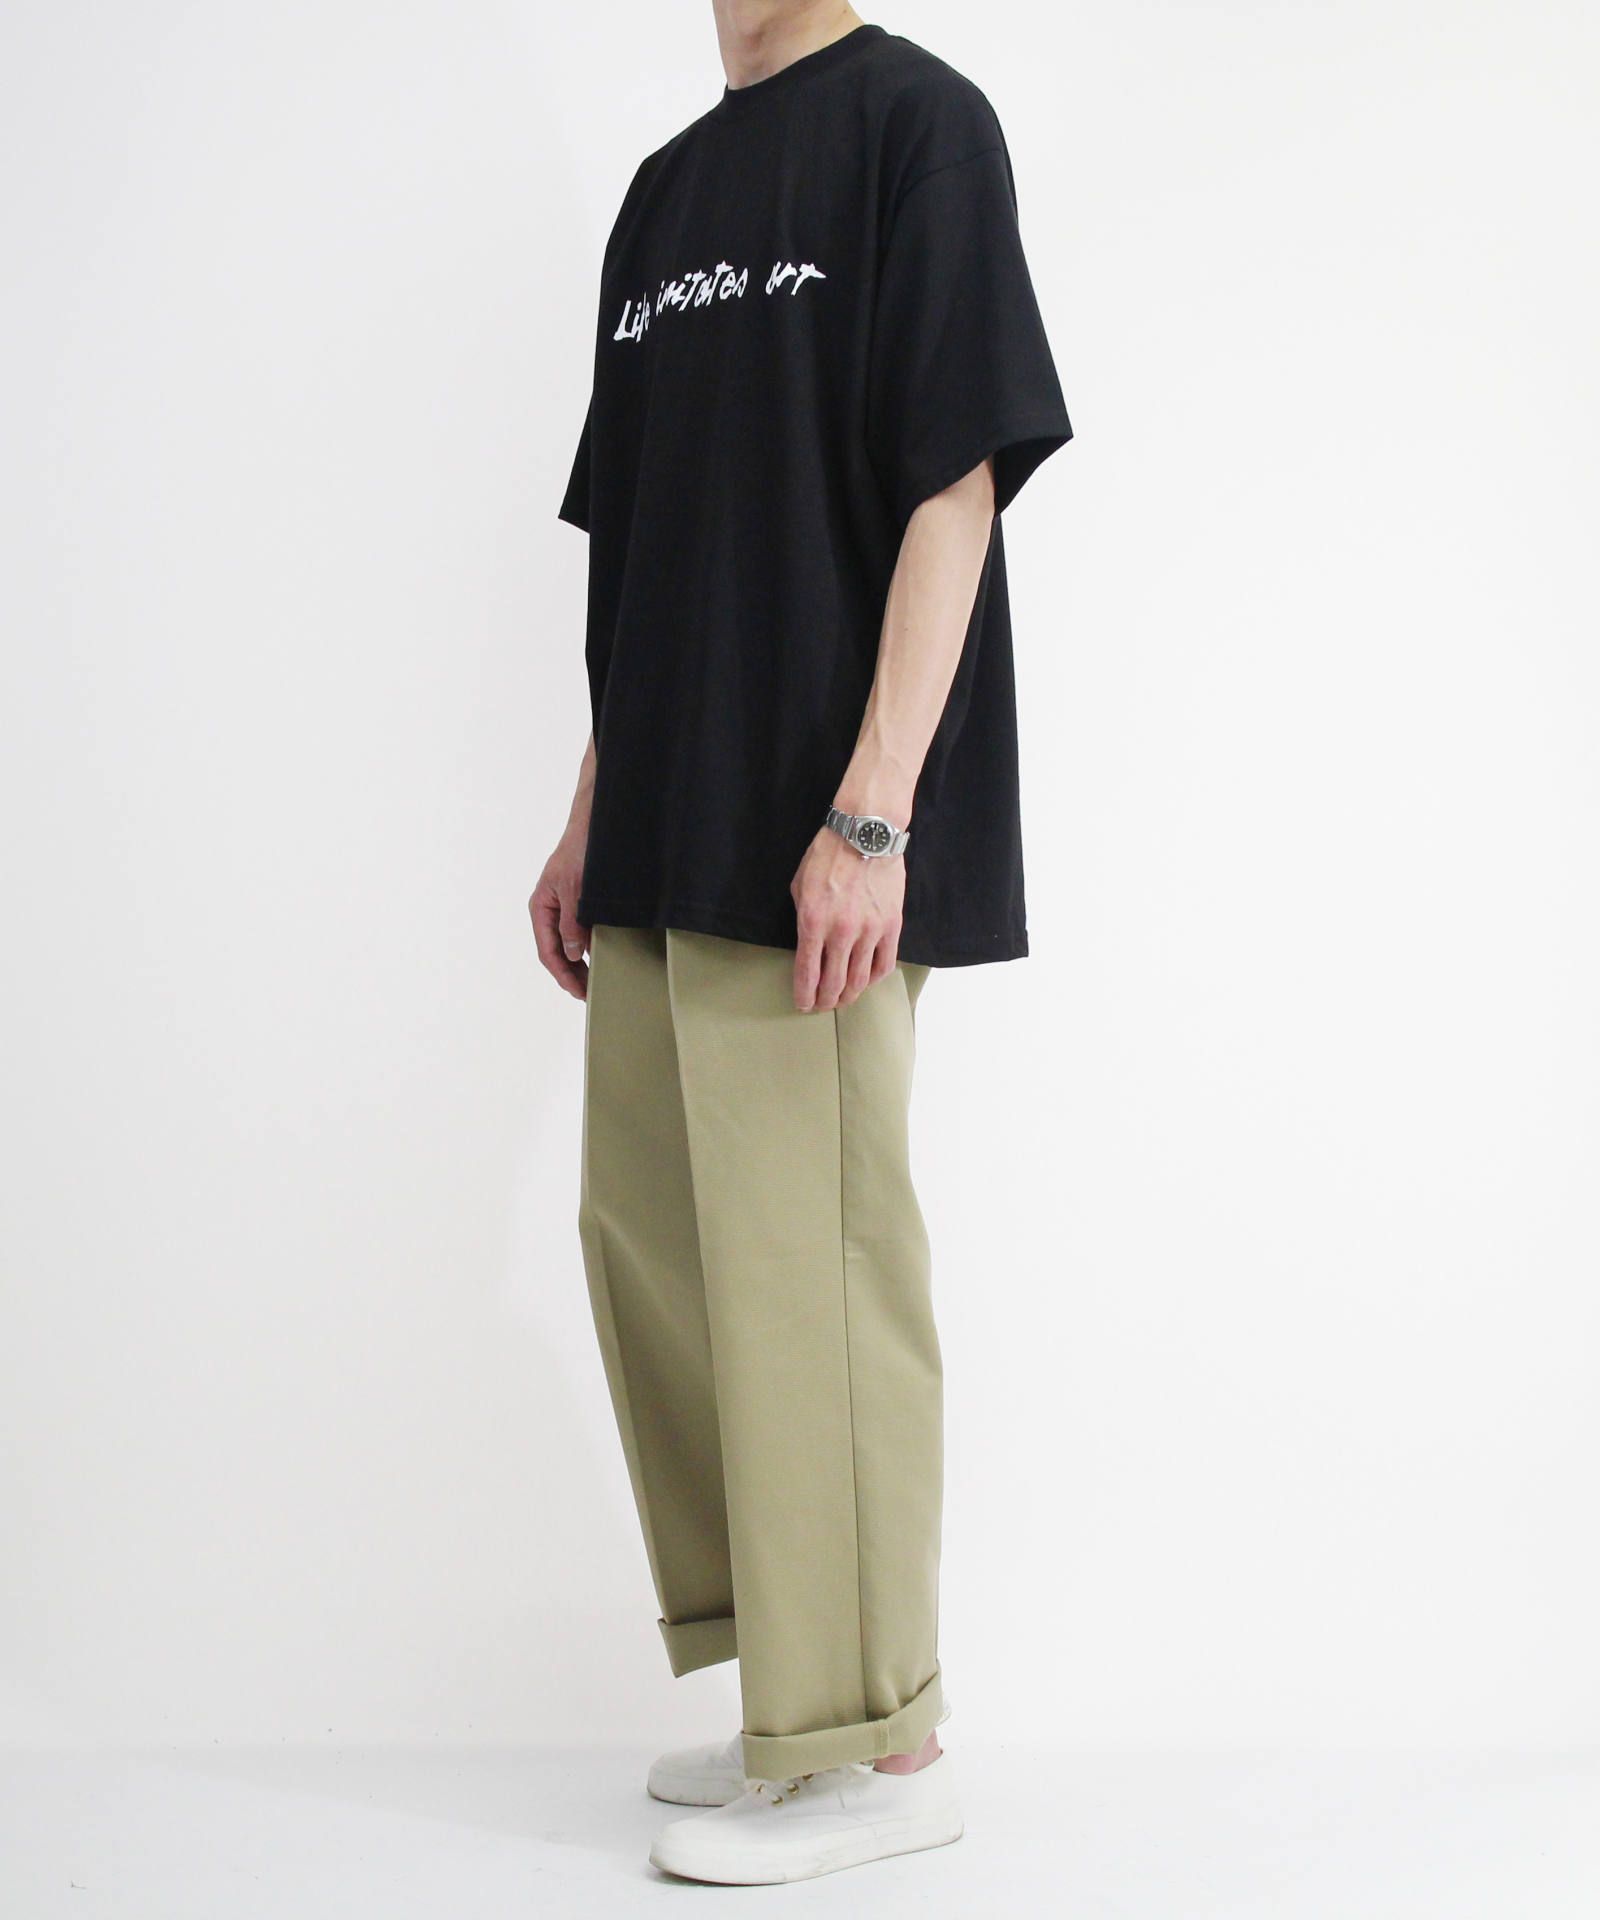 CLANE HOMME - メンズプリントTシャツ - BRUSH WRITING T/S - BLACK